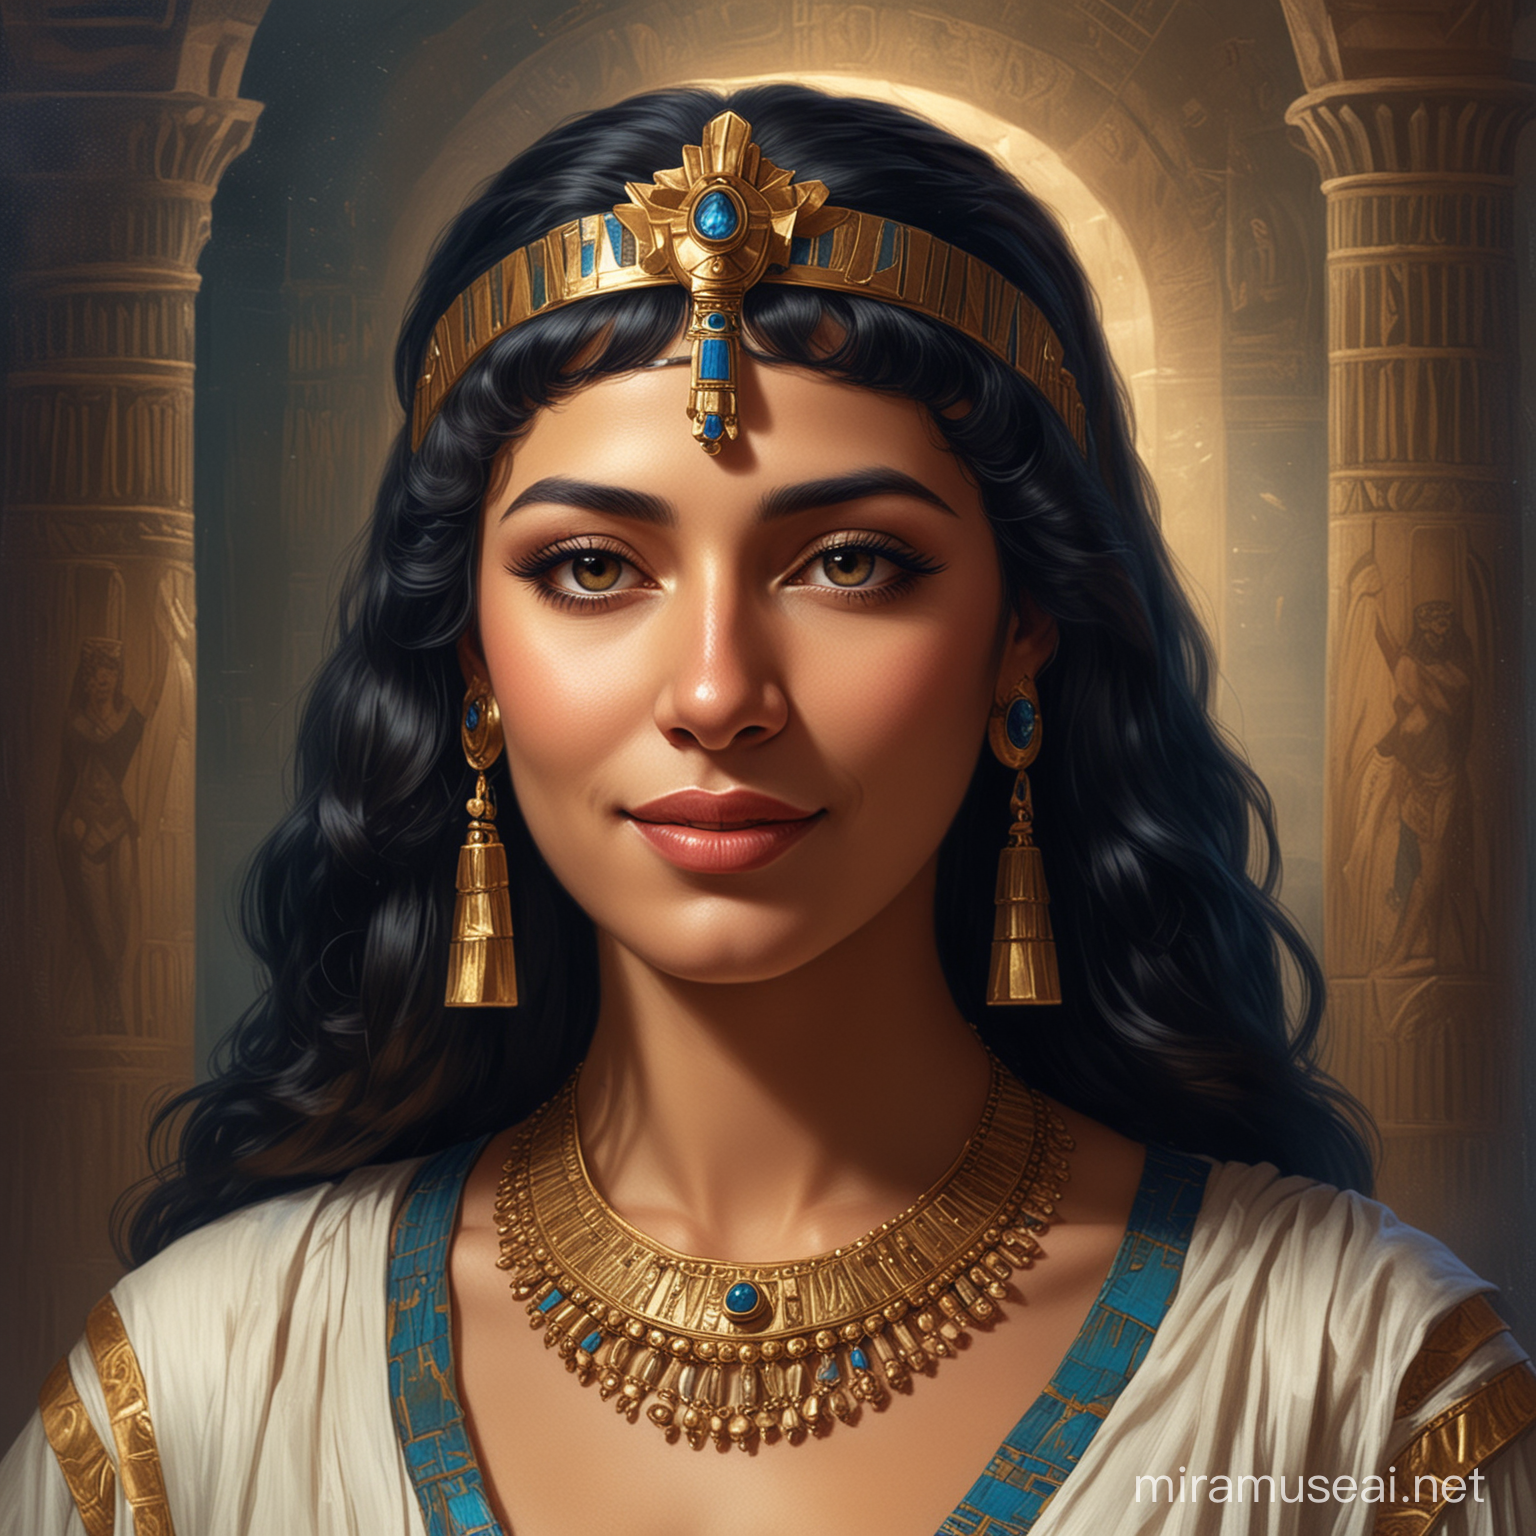 A portrait of Queen Cleopatra, with a subtle hint of mystery in her smile, hinting at the hidden depths of her power and secrets.